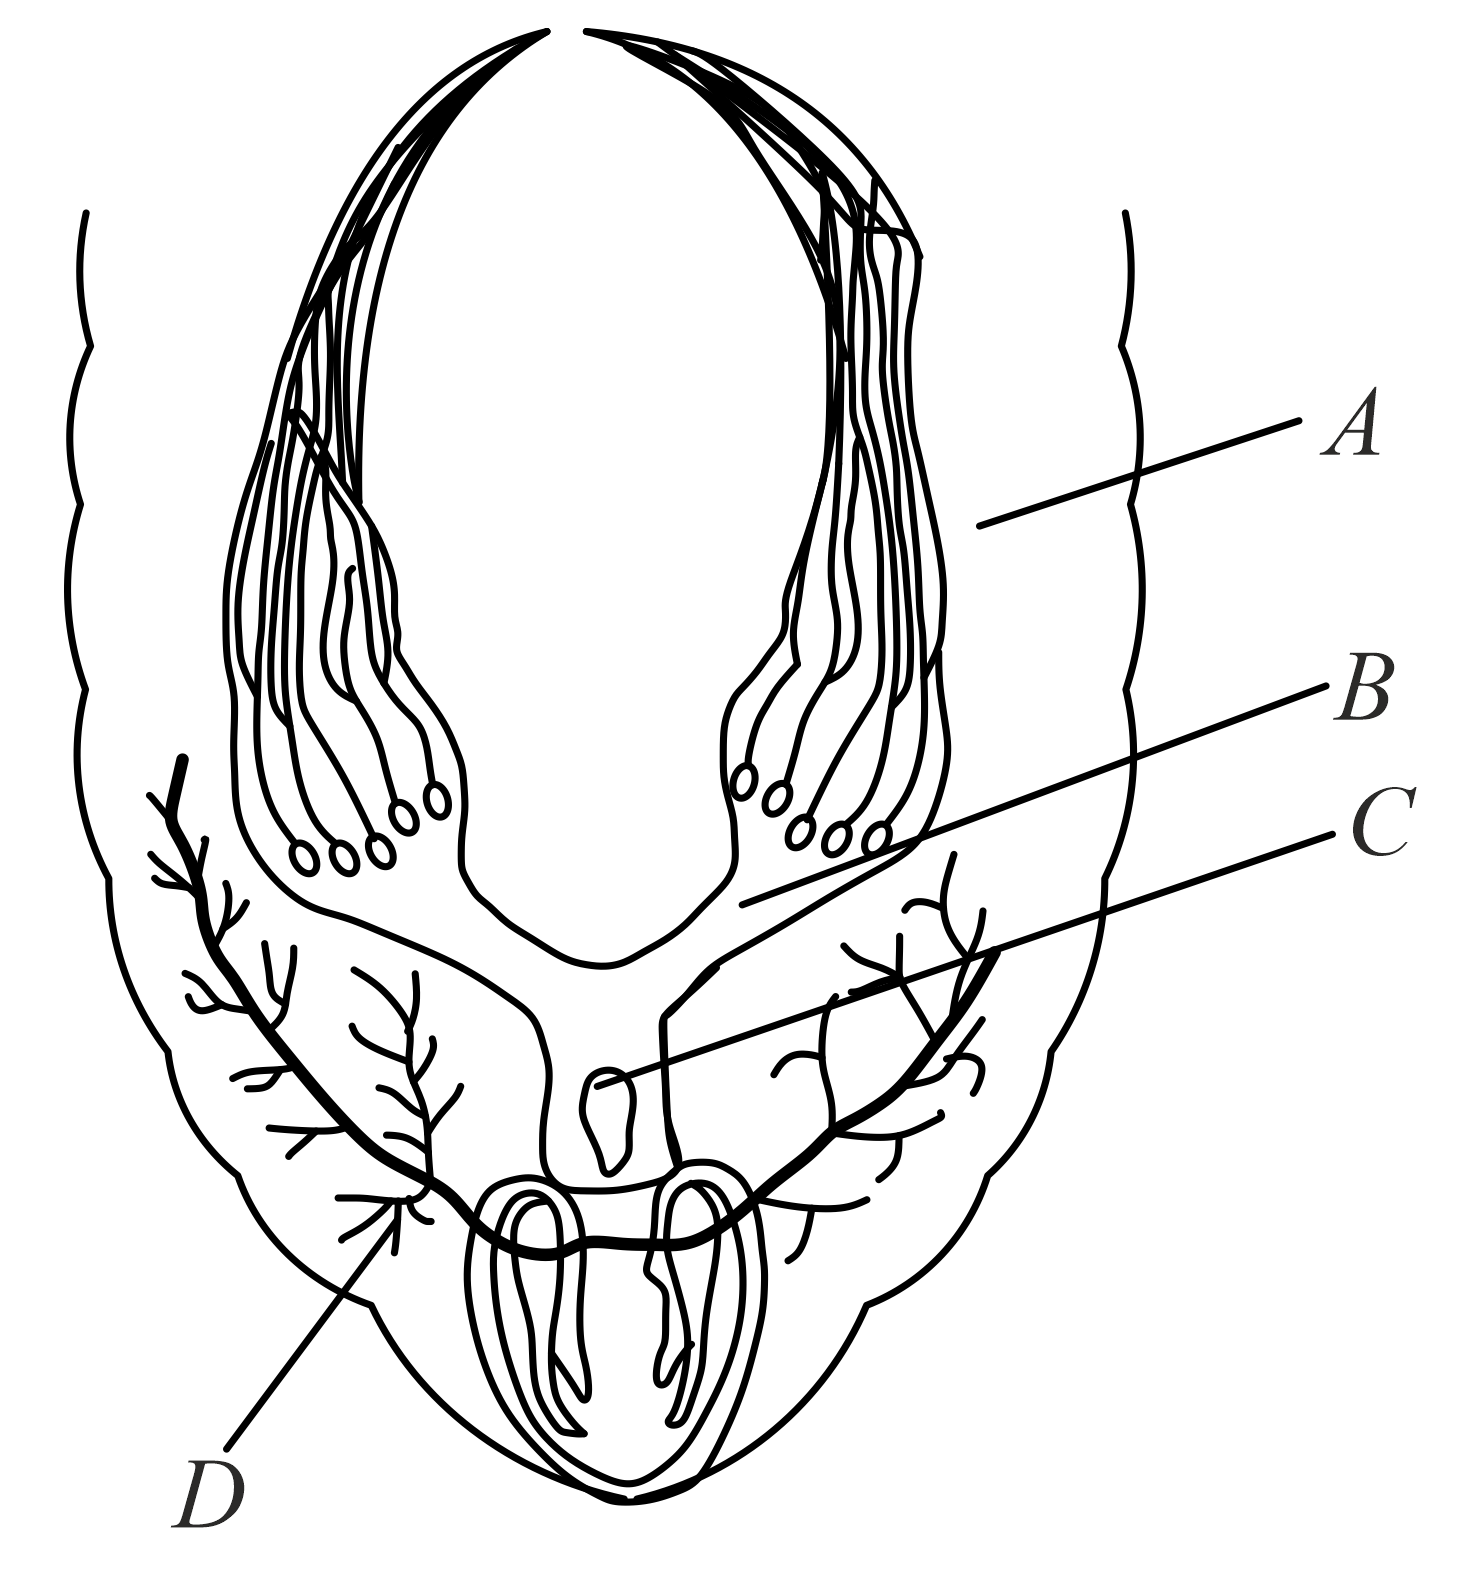 Draw a neat labelled diagram of female reproductive system.